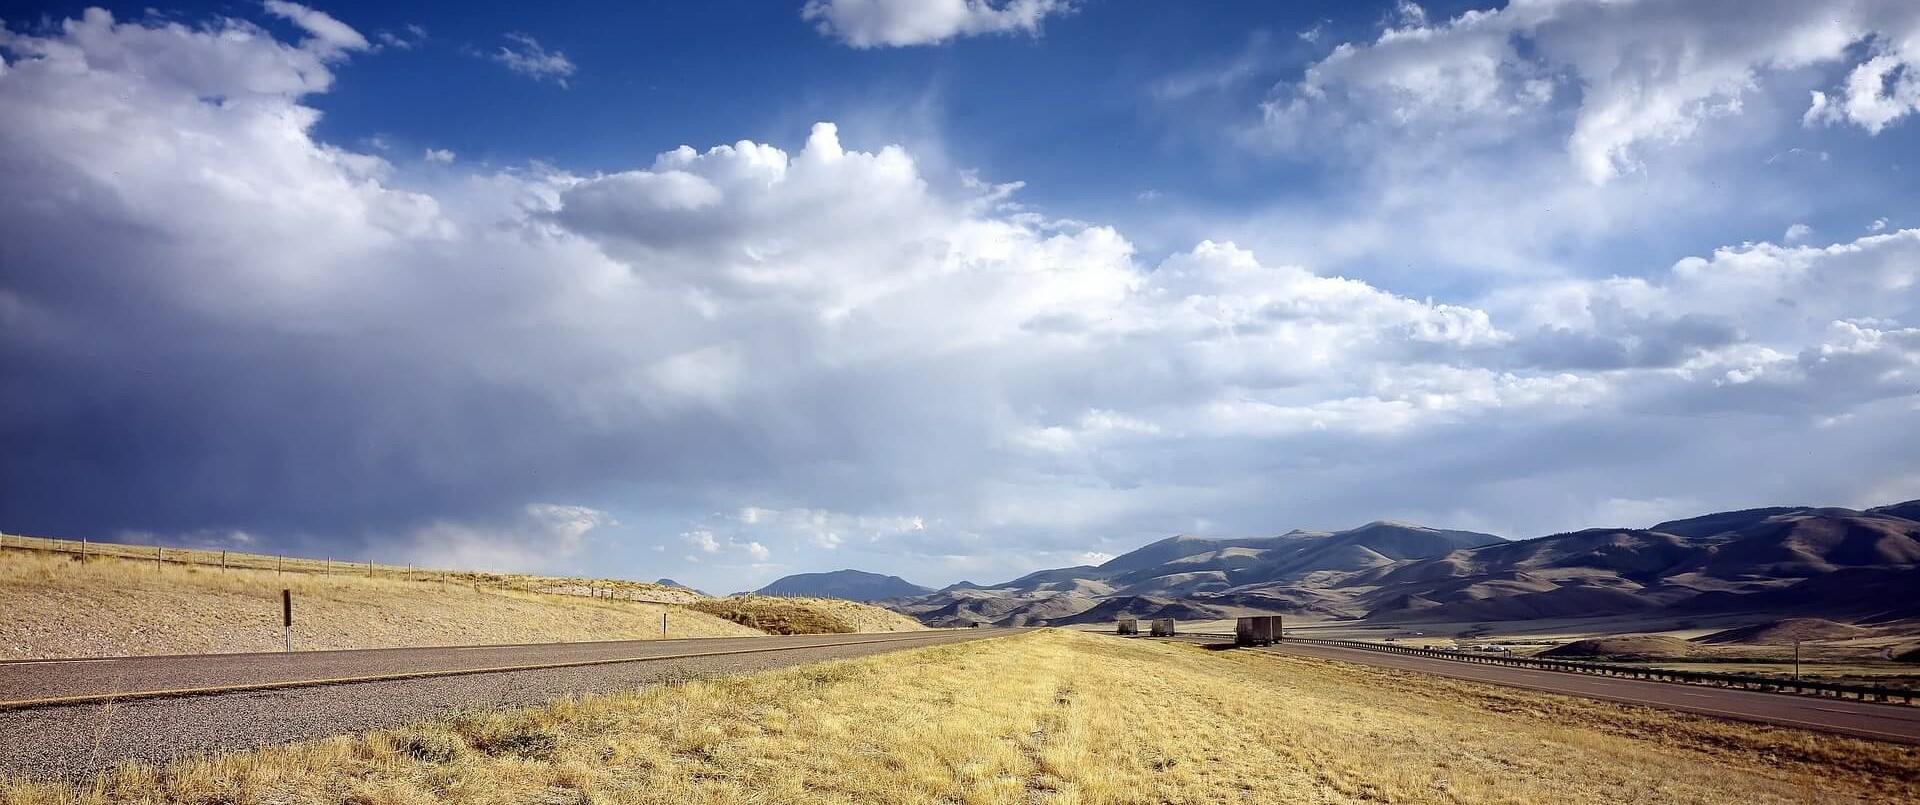 Photo of grassland and mountains in Idaho